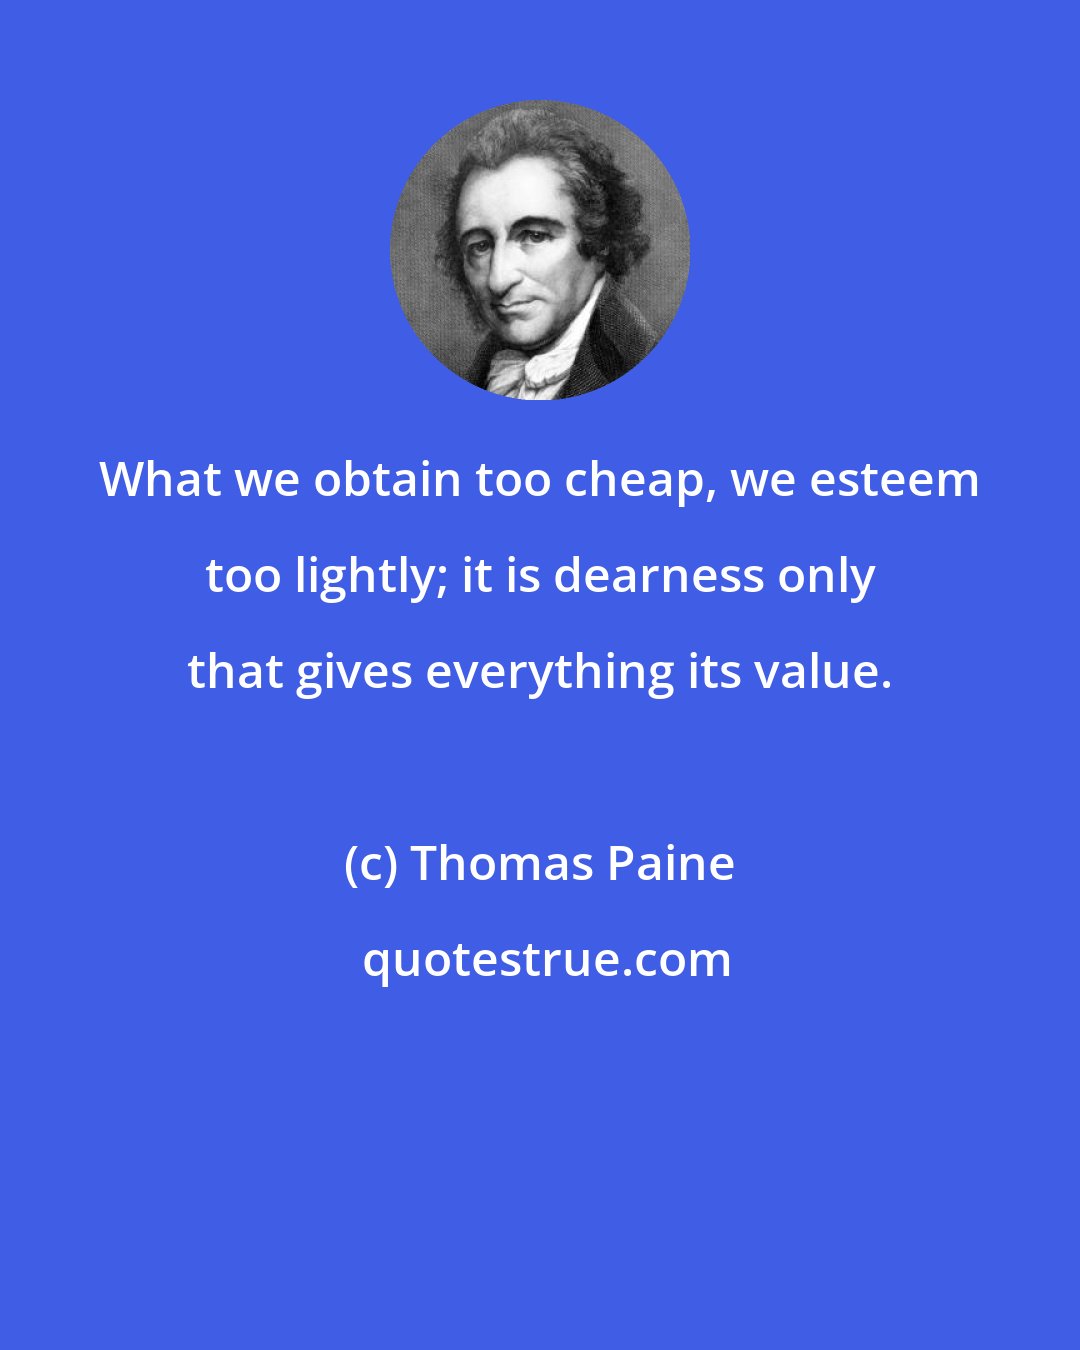 Thomas Paine: What we obtain too cheap, we esteem too lightly; it is dearness only that gives everything its value.